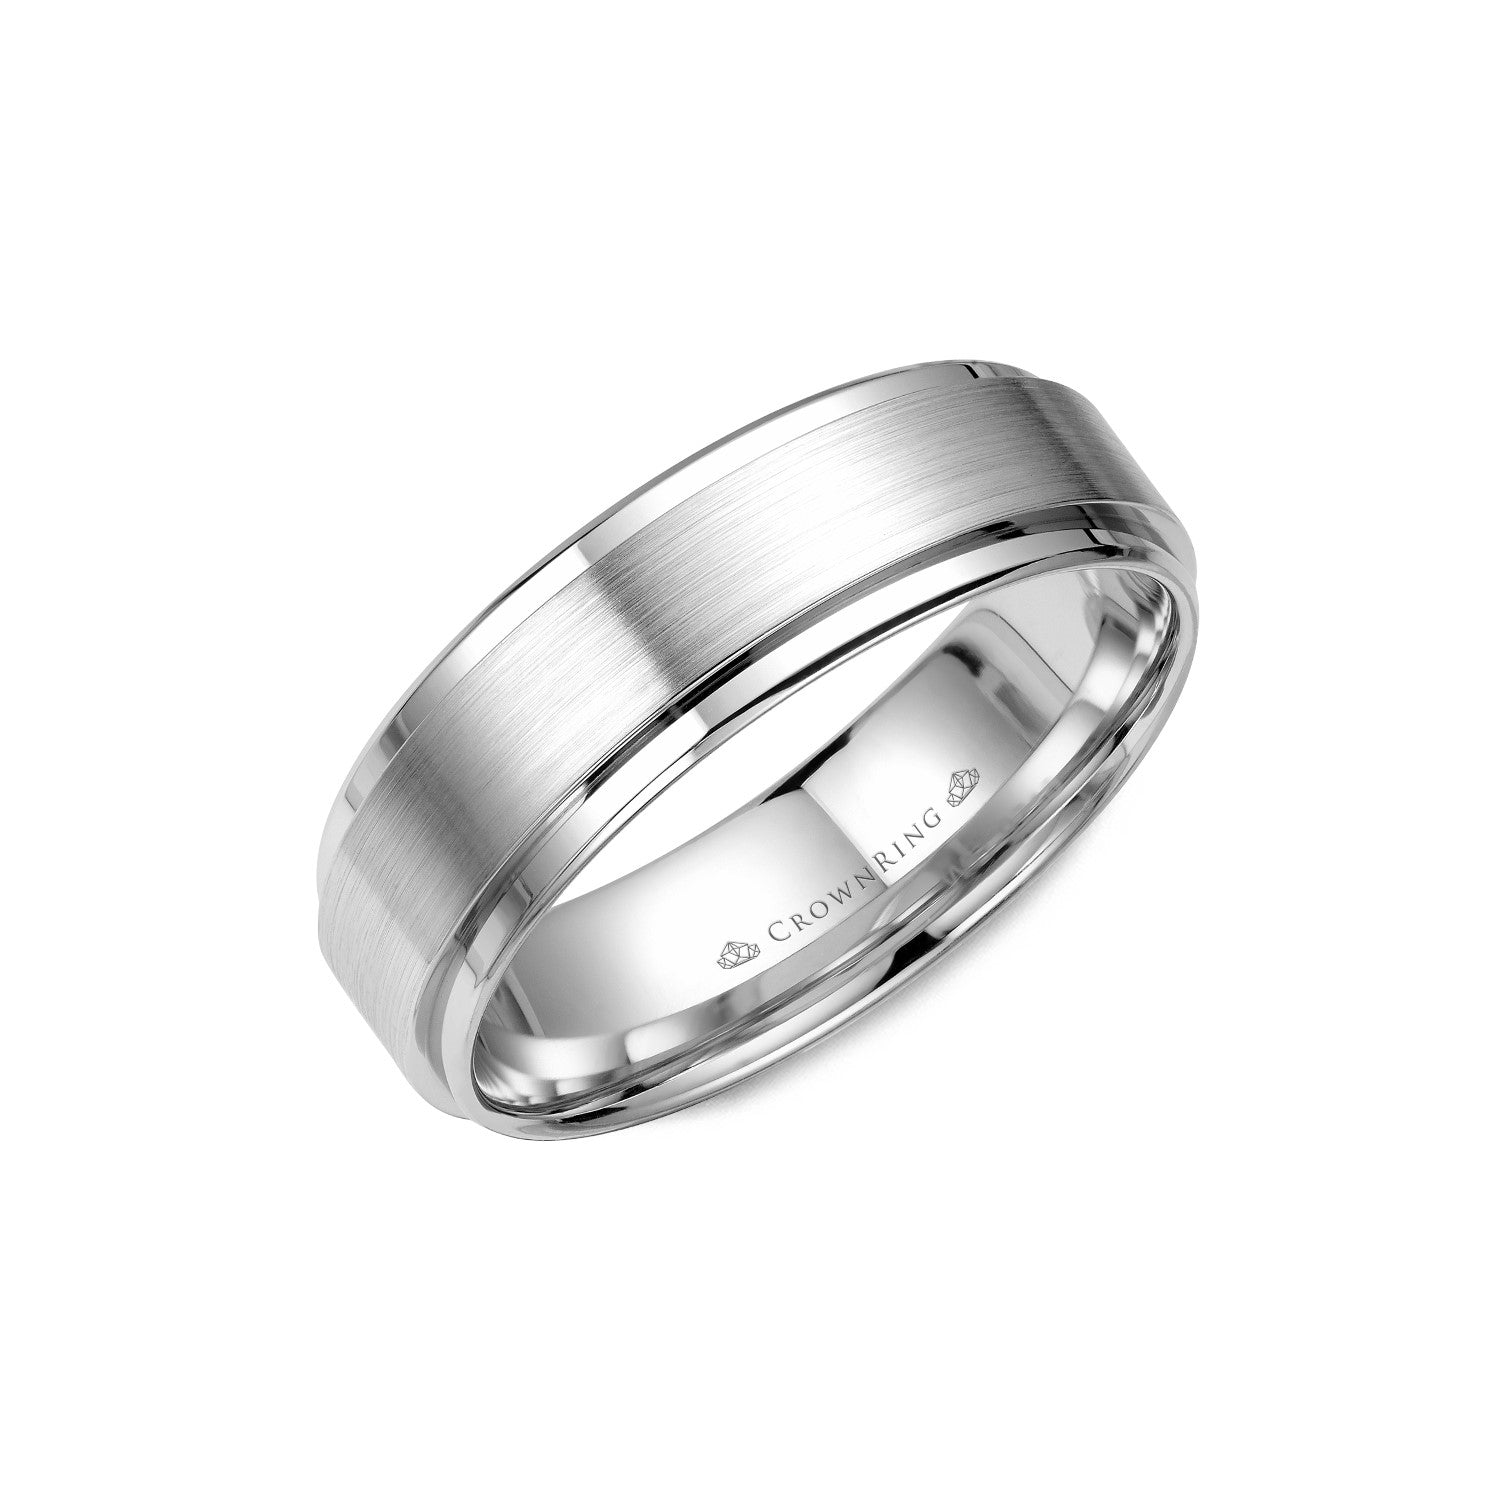 6mm Classic Wedding Band With Sandpaper Top And Raised Edges